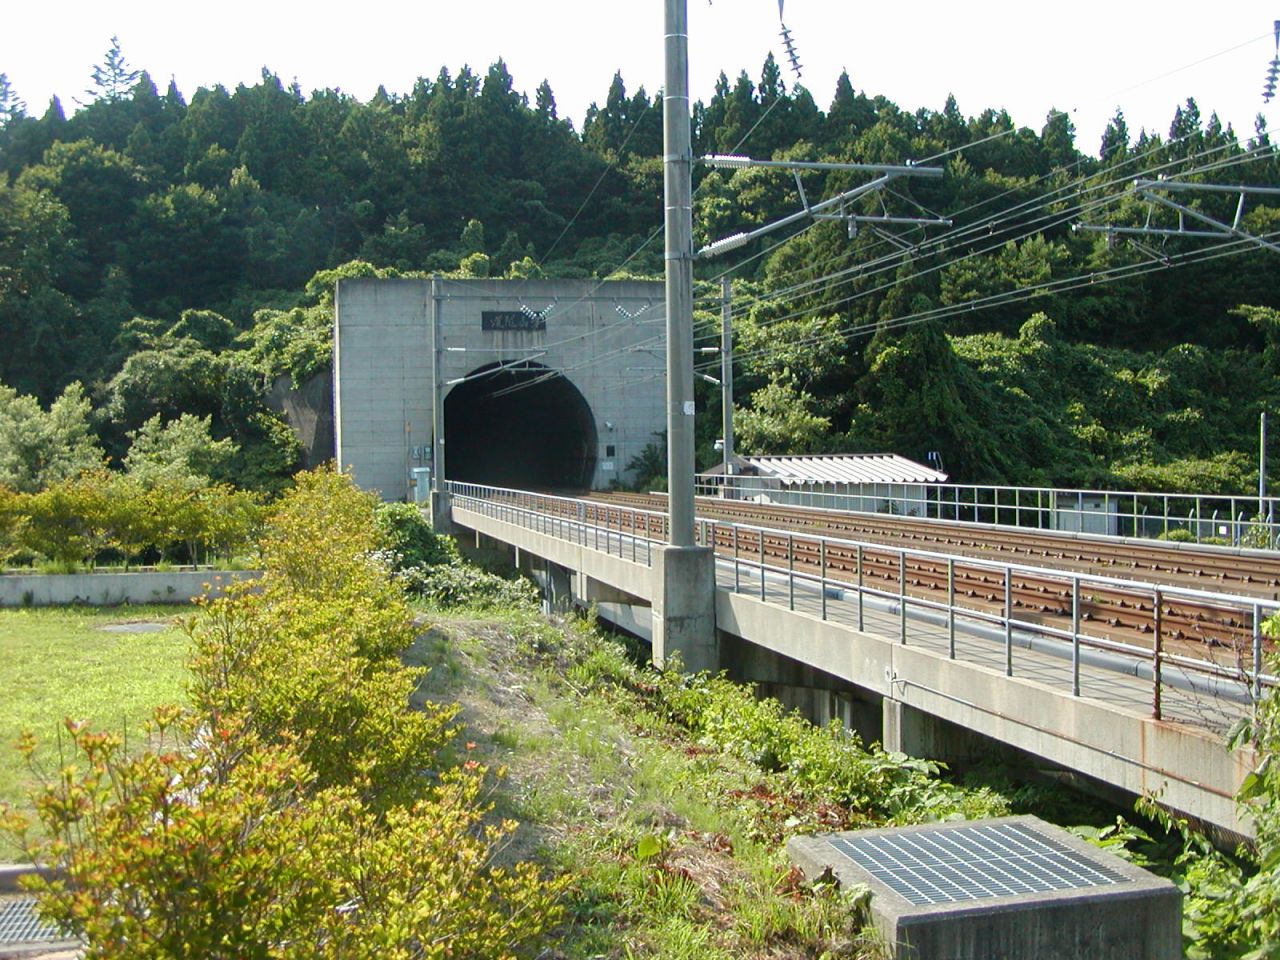 The 53-kilometer Seikan is a railway tunnel in Japan with a 23-kilometer stretch that runs underwater, Before the Gotthard Base Tunnel came along, it was the world's longest and deepest rail tunnel. <strong>Length: </strong>53 kilometers